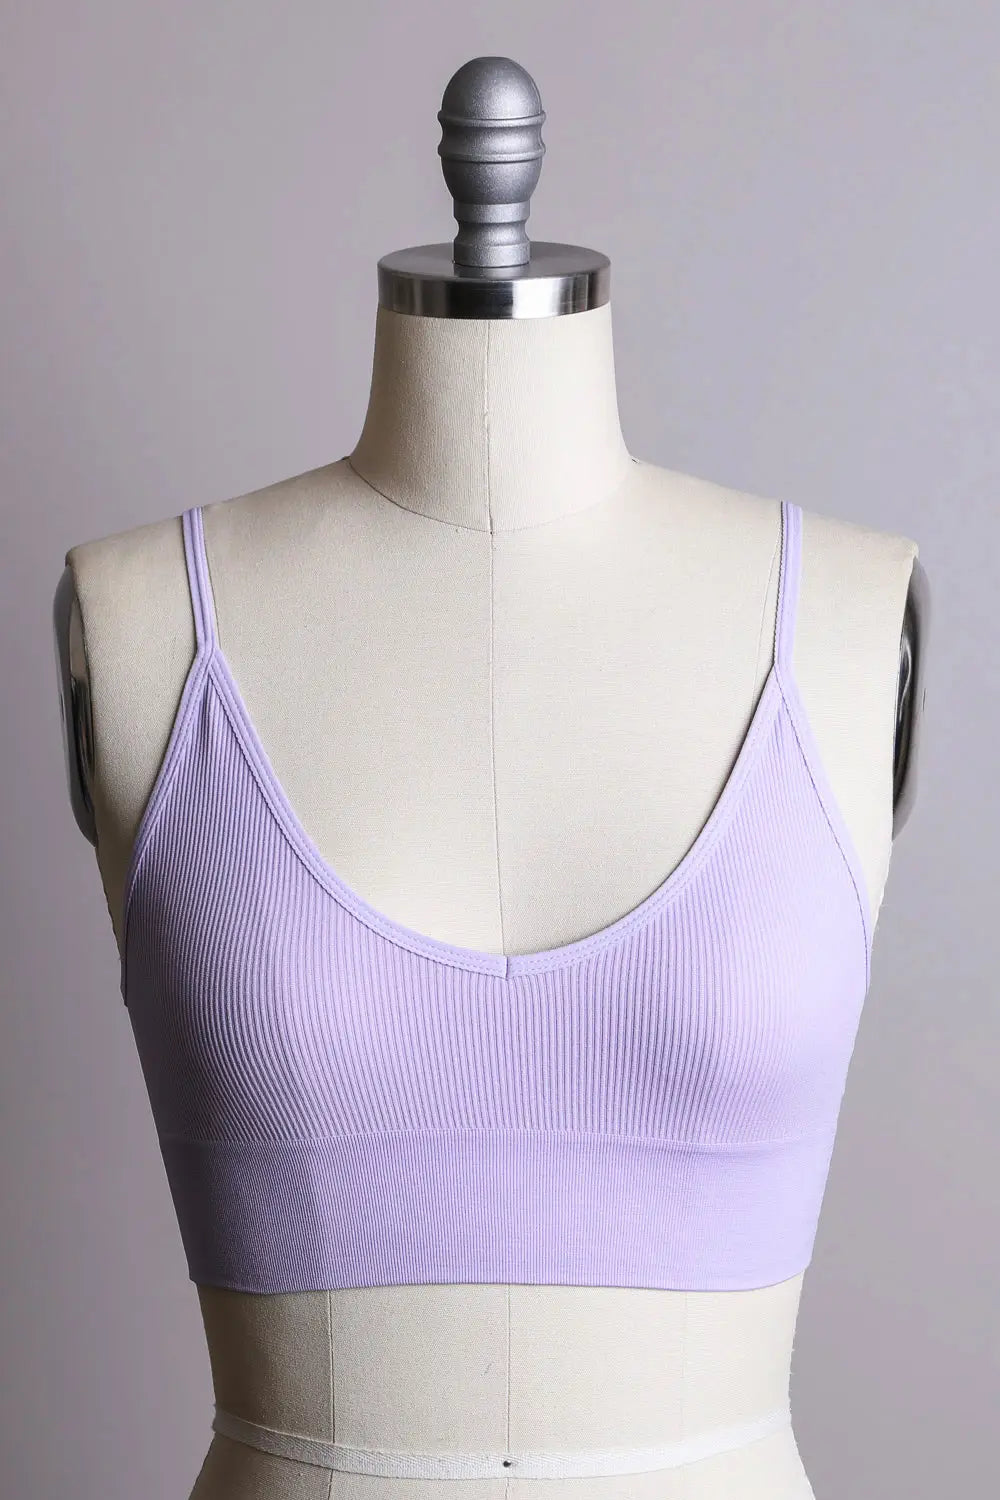 lavender soft ribbed low back bralette comfortable Modern smart causal female chic effortless outfit womens ladies gift elegant effortless clothing everyday stylish clothes apparel outfits chic winter summer style women’s boutique trendy teacher office cute outfit boutique clothes fashion quality work from home coastal beachy lounge athleisure gift for her midsize curvy sizes 